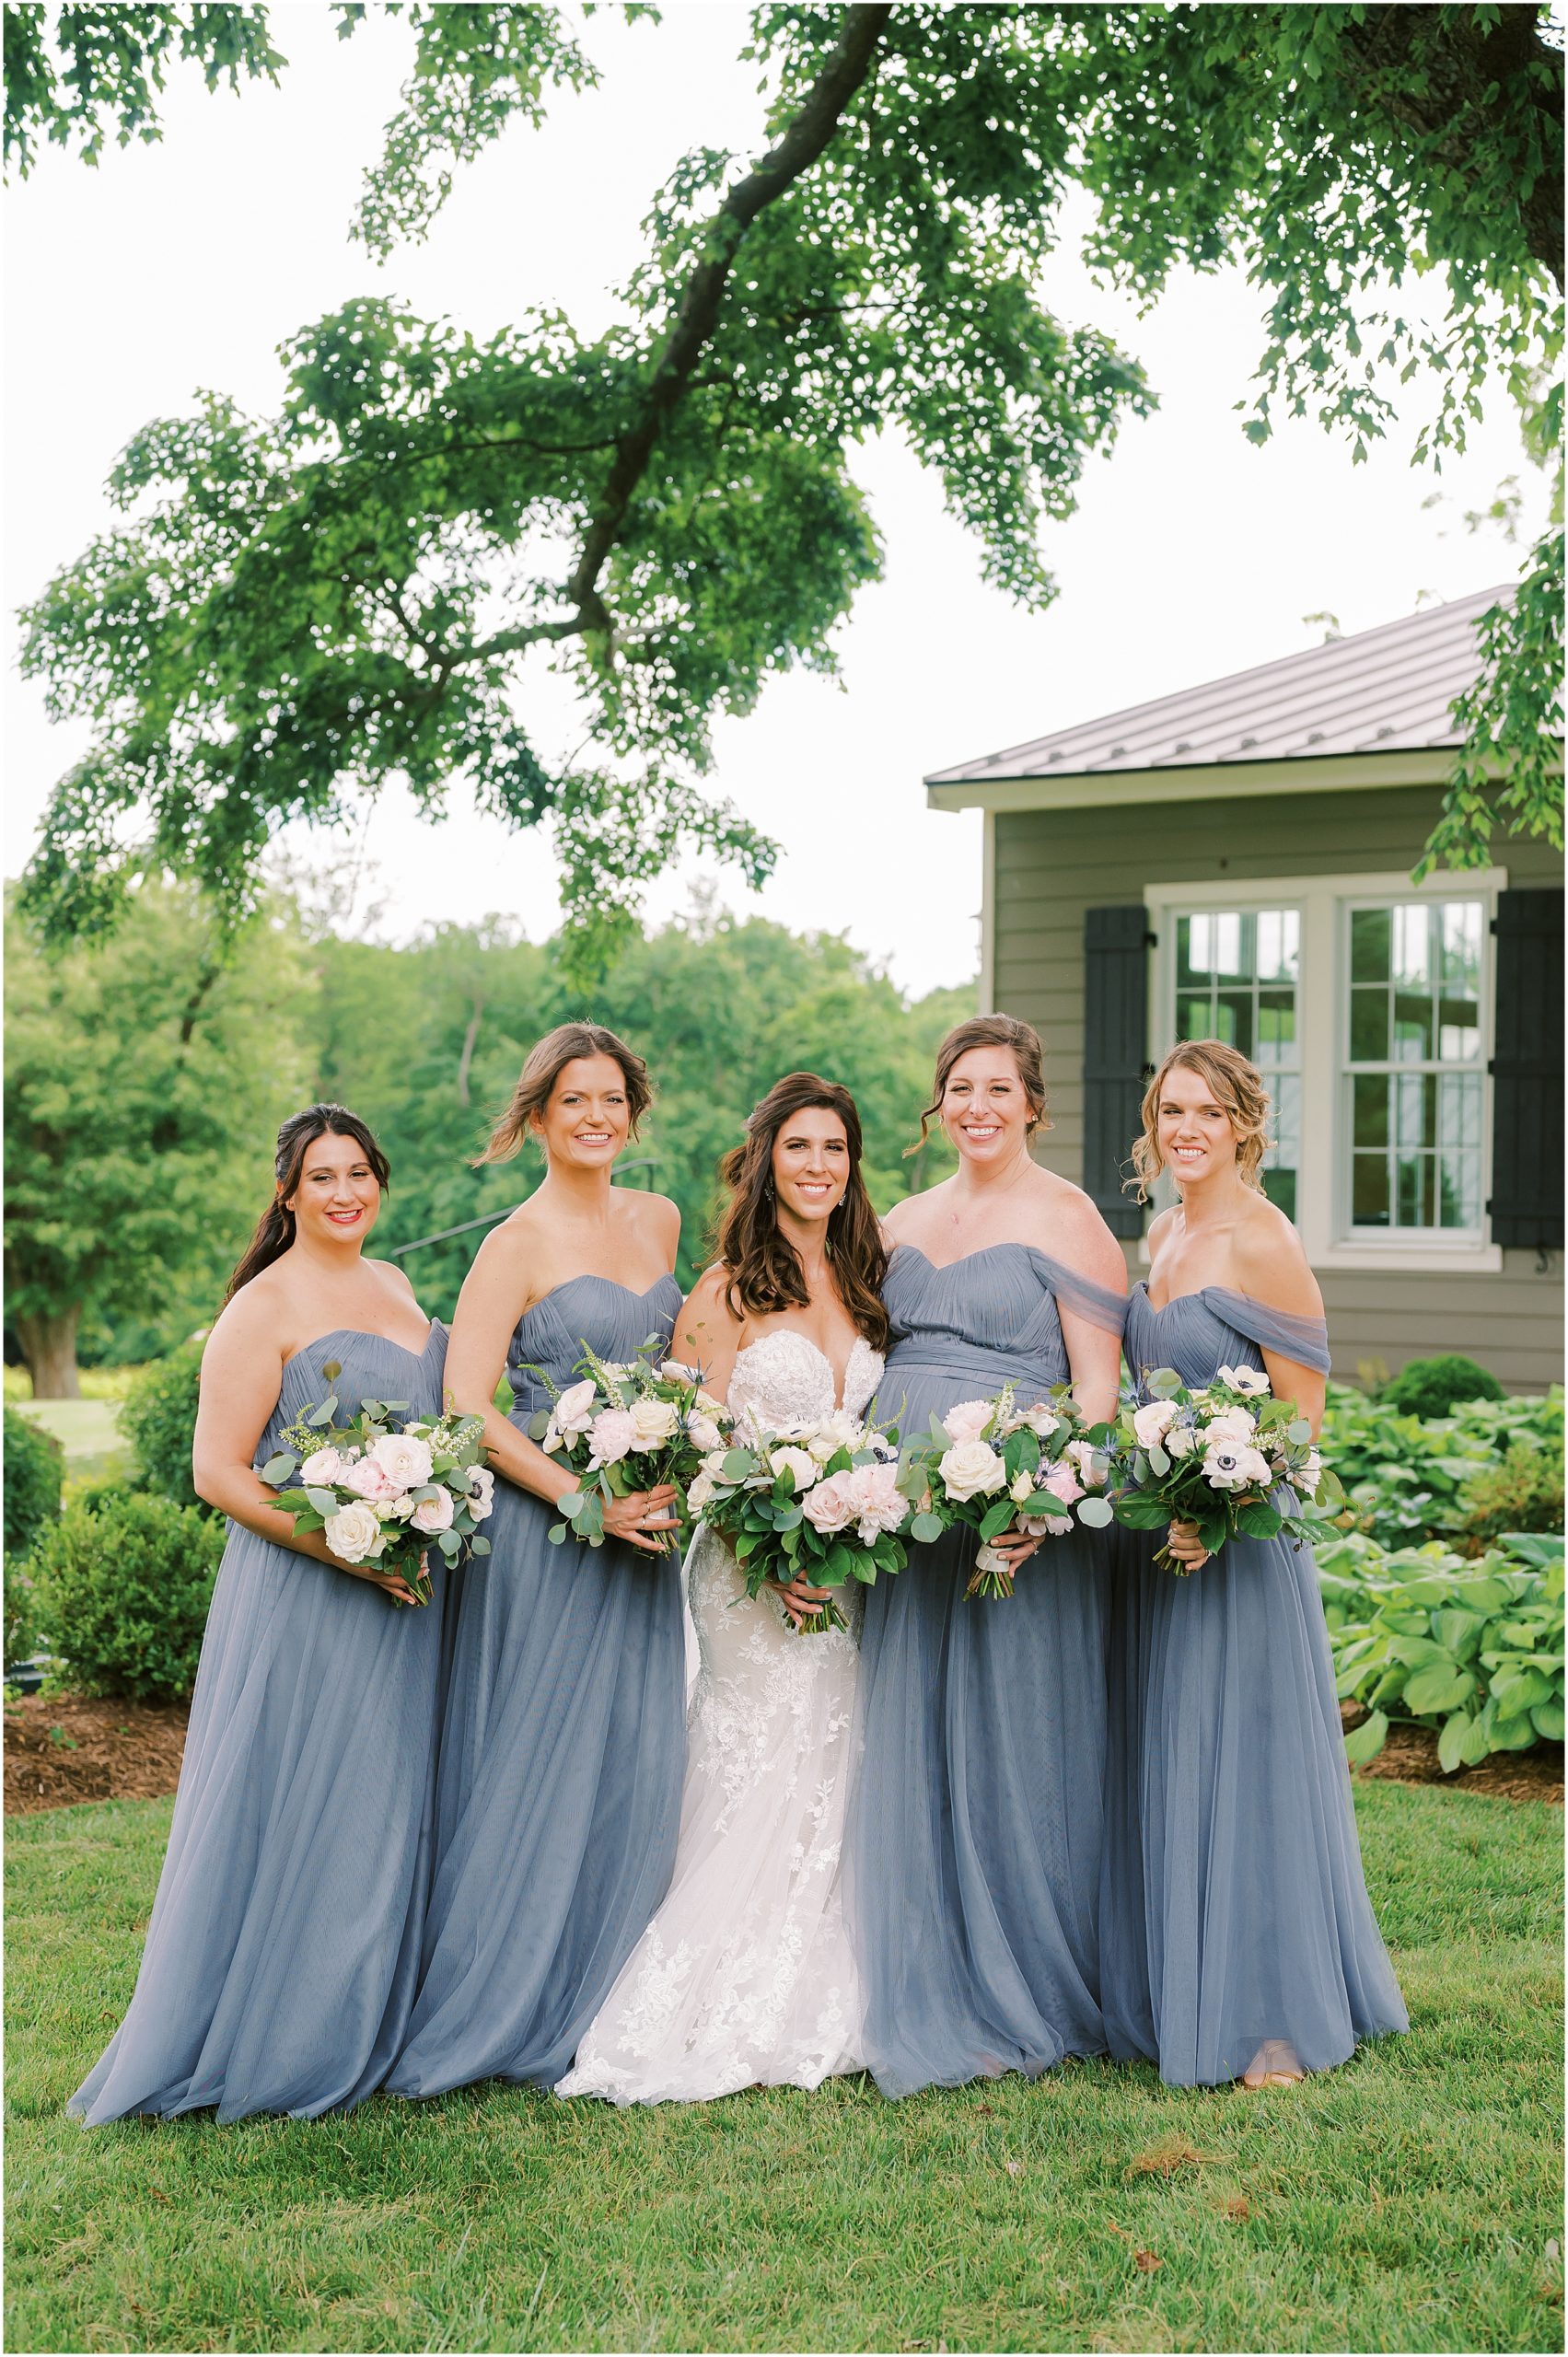 Bride with bridesmaids wearing strapless dusty blue bridesmaid dresses